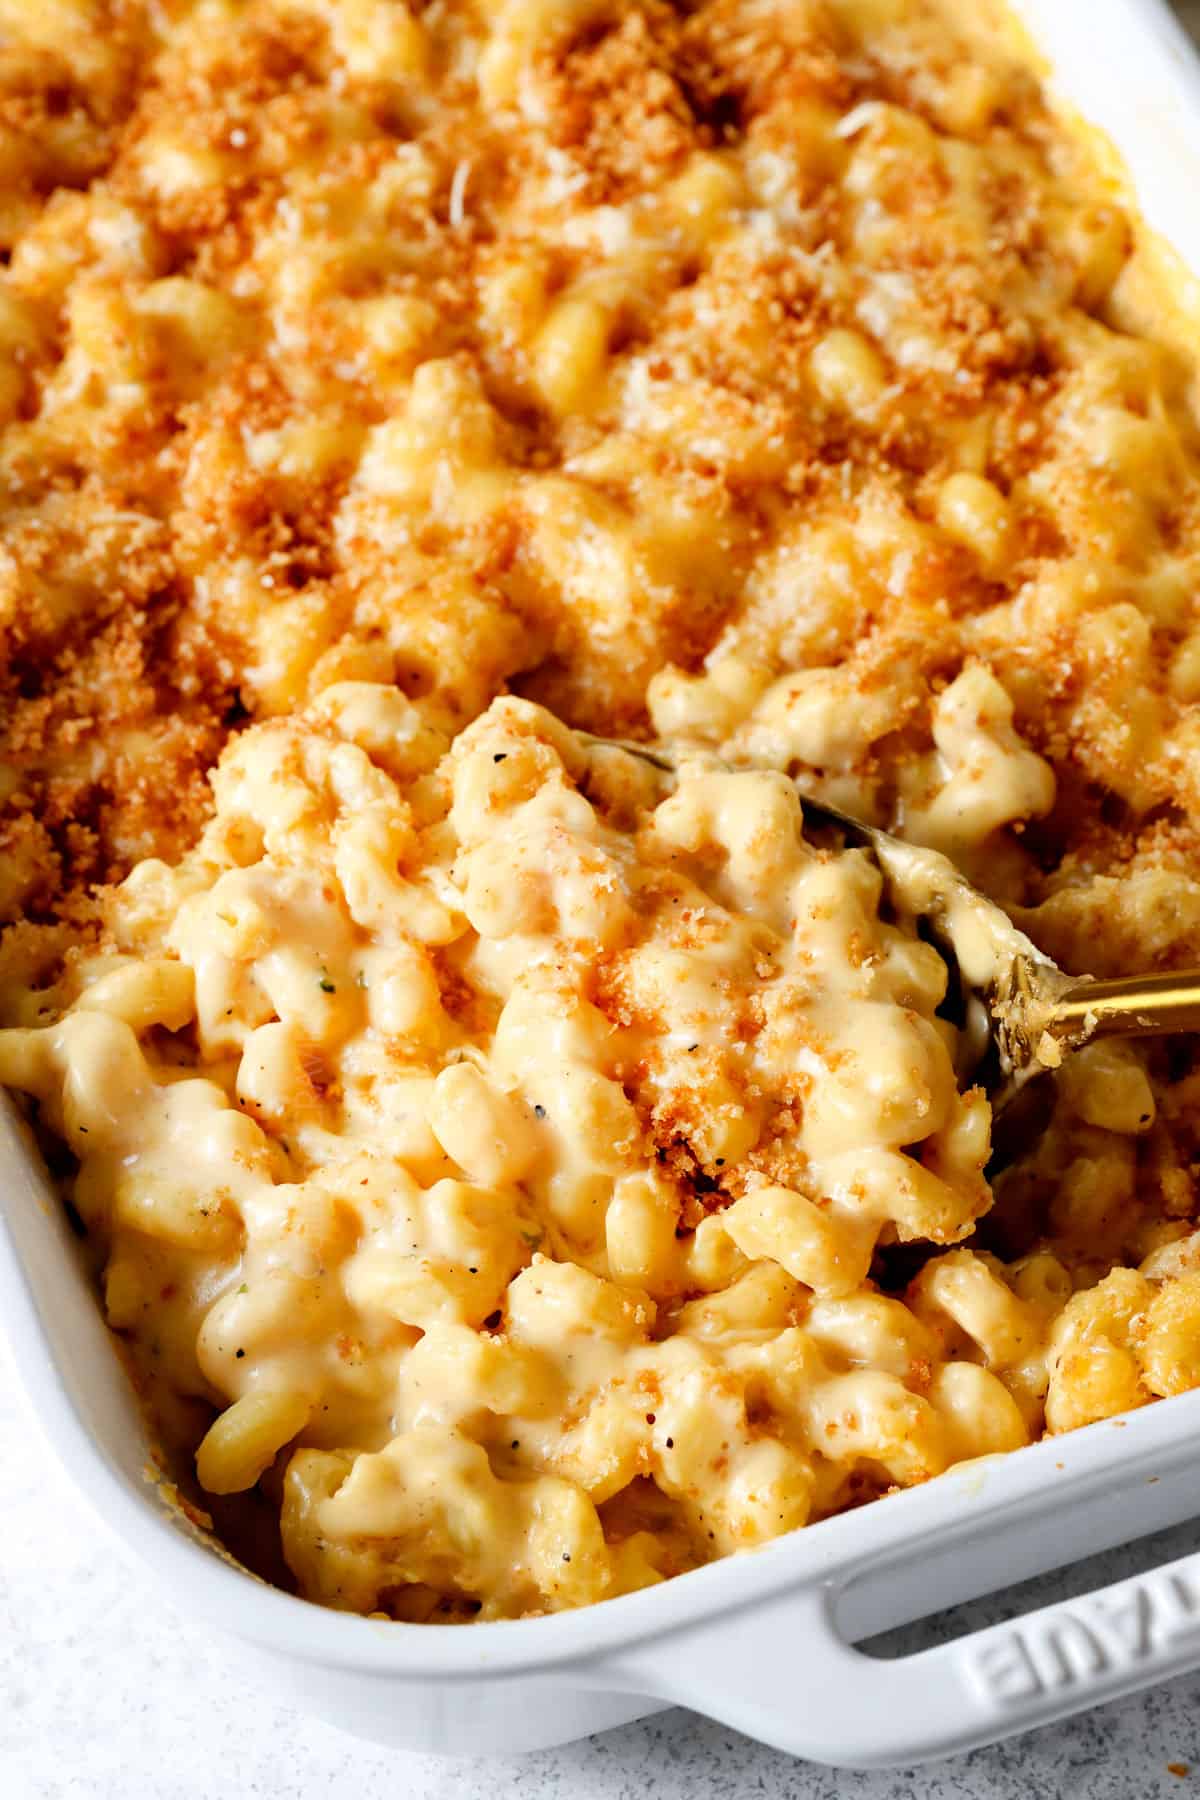 scooping up baked macaroni and cheese with breadcrumbs made with cheddar, Gruyere and Gouda